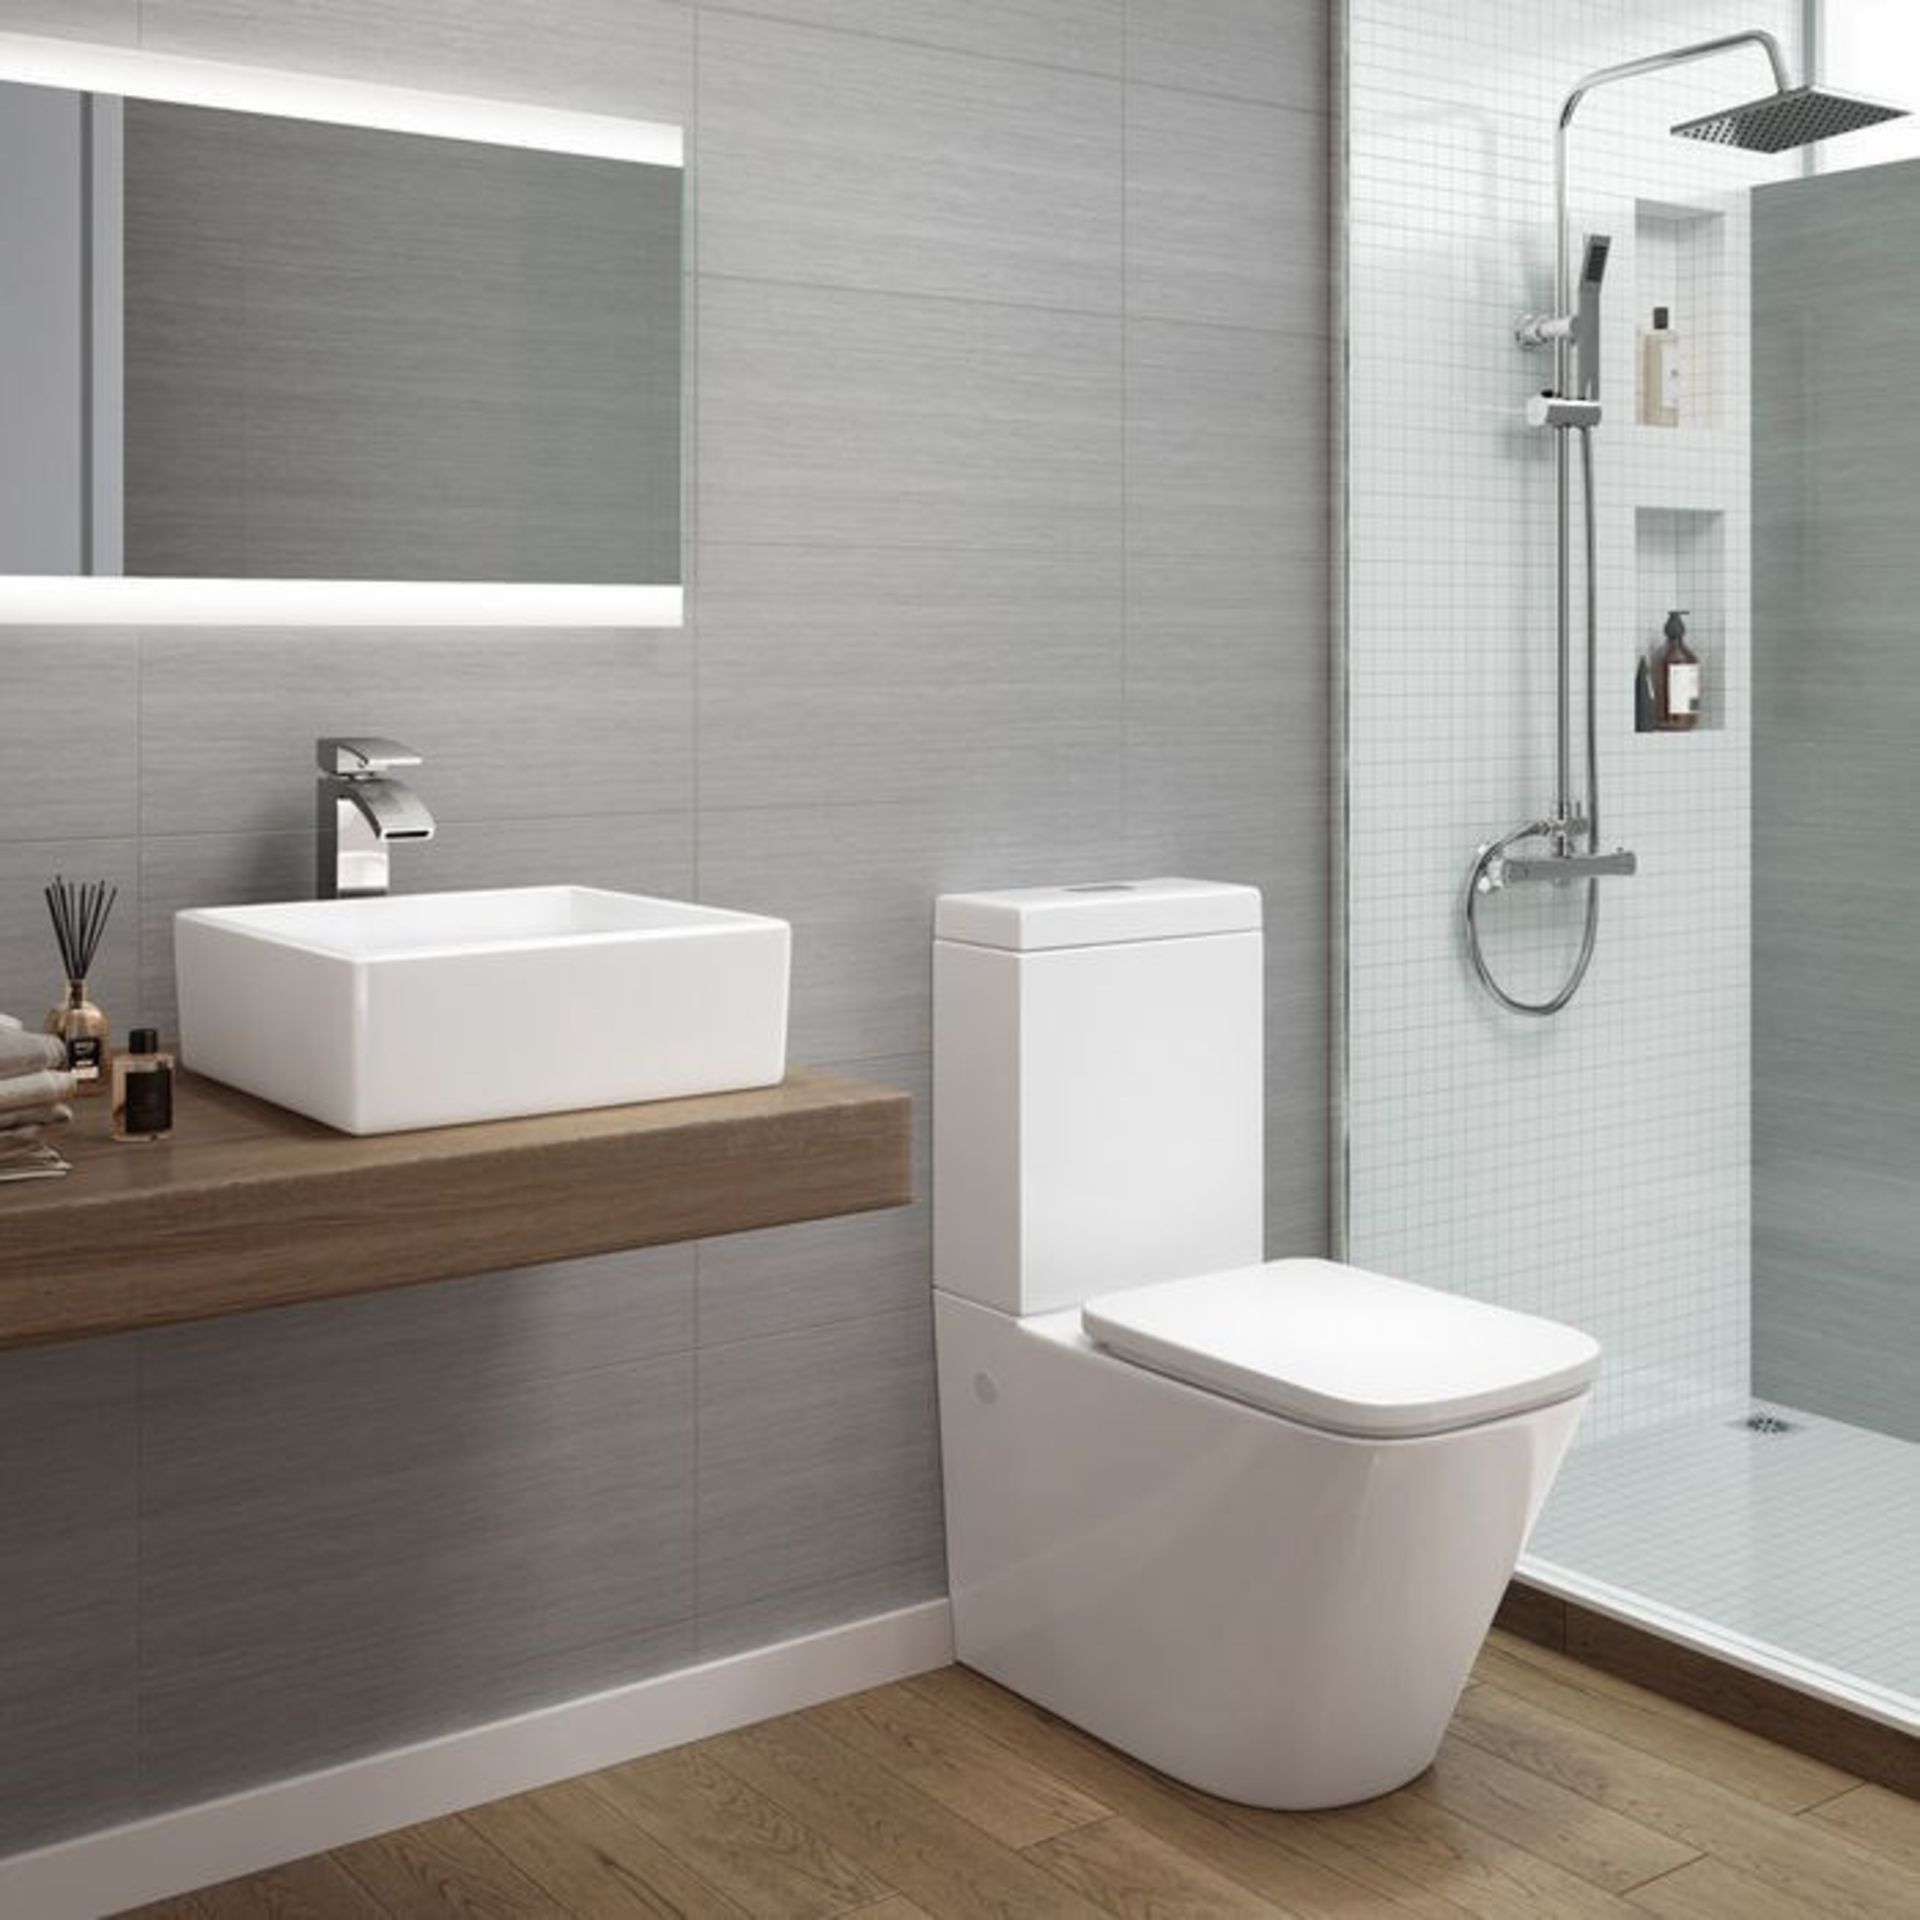 NEW & BOXED Florence Close Coupled Toilet & Cistern inc Soft Close Seat. Contemporary design... - Image 2 of 2